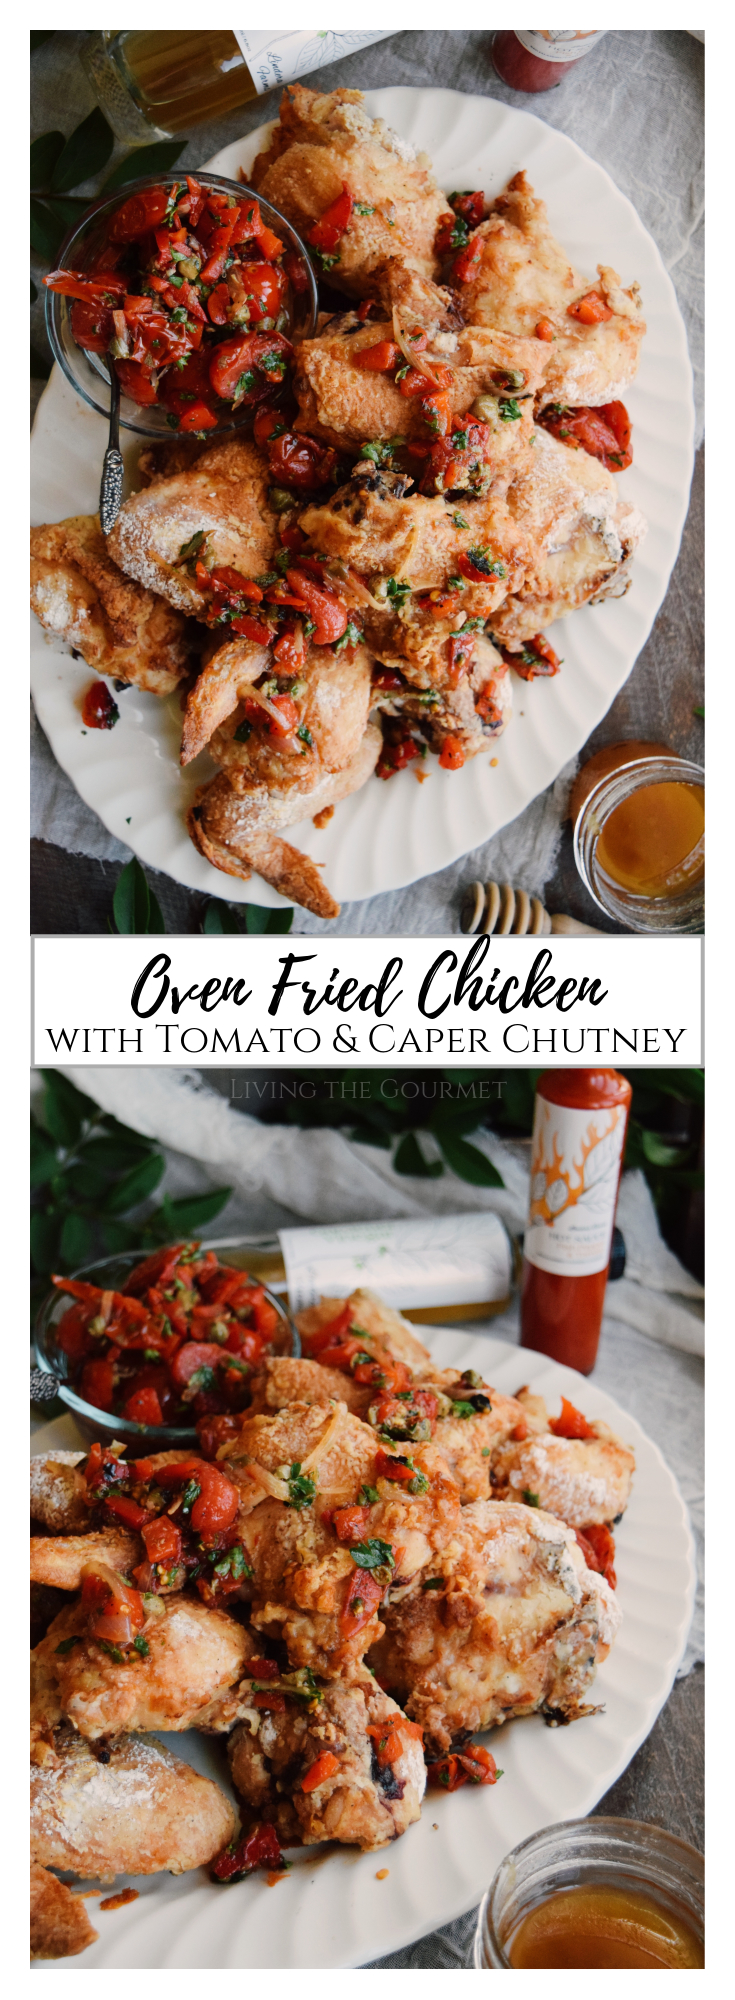 Oven Fried Chicken with Tomato & Caper Chutney - Living The Gourmet